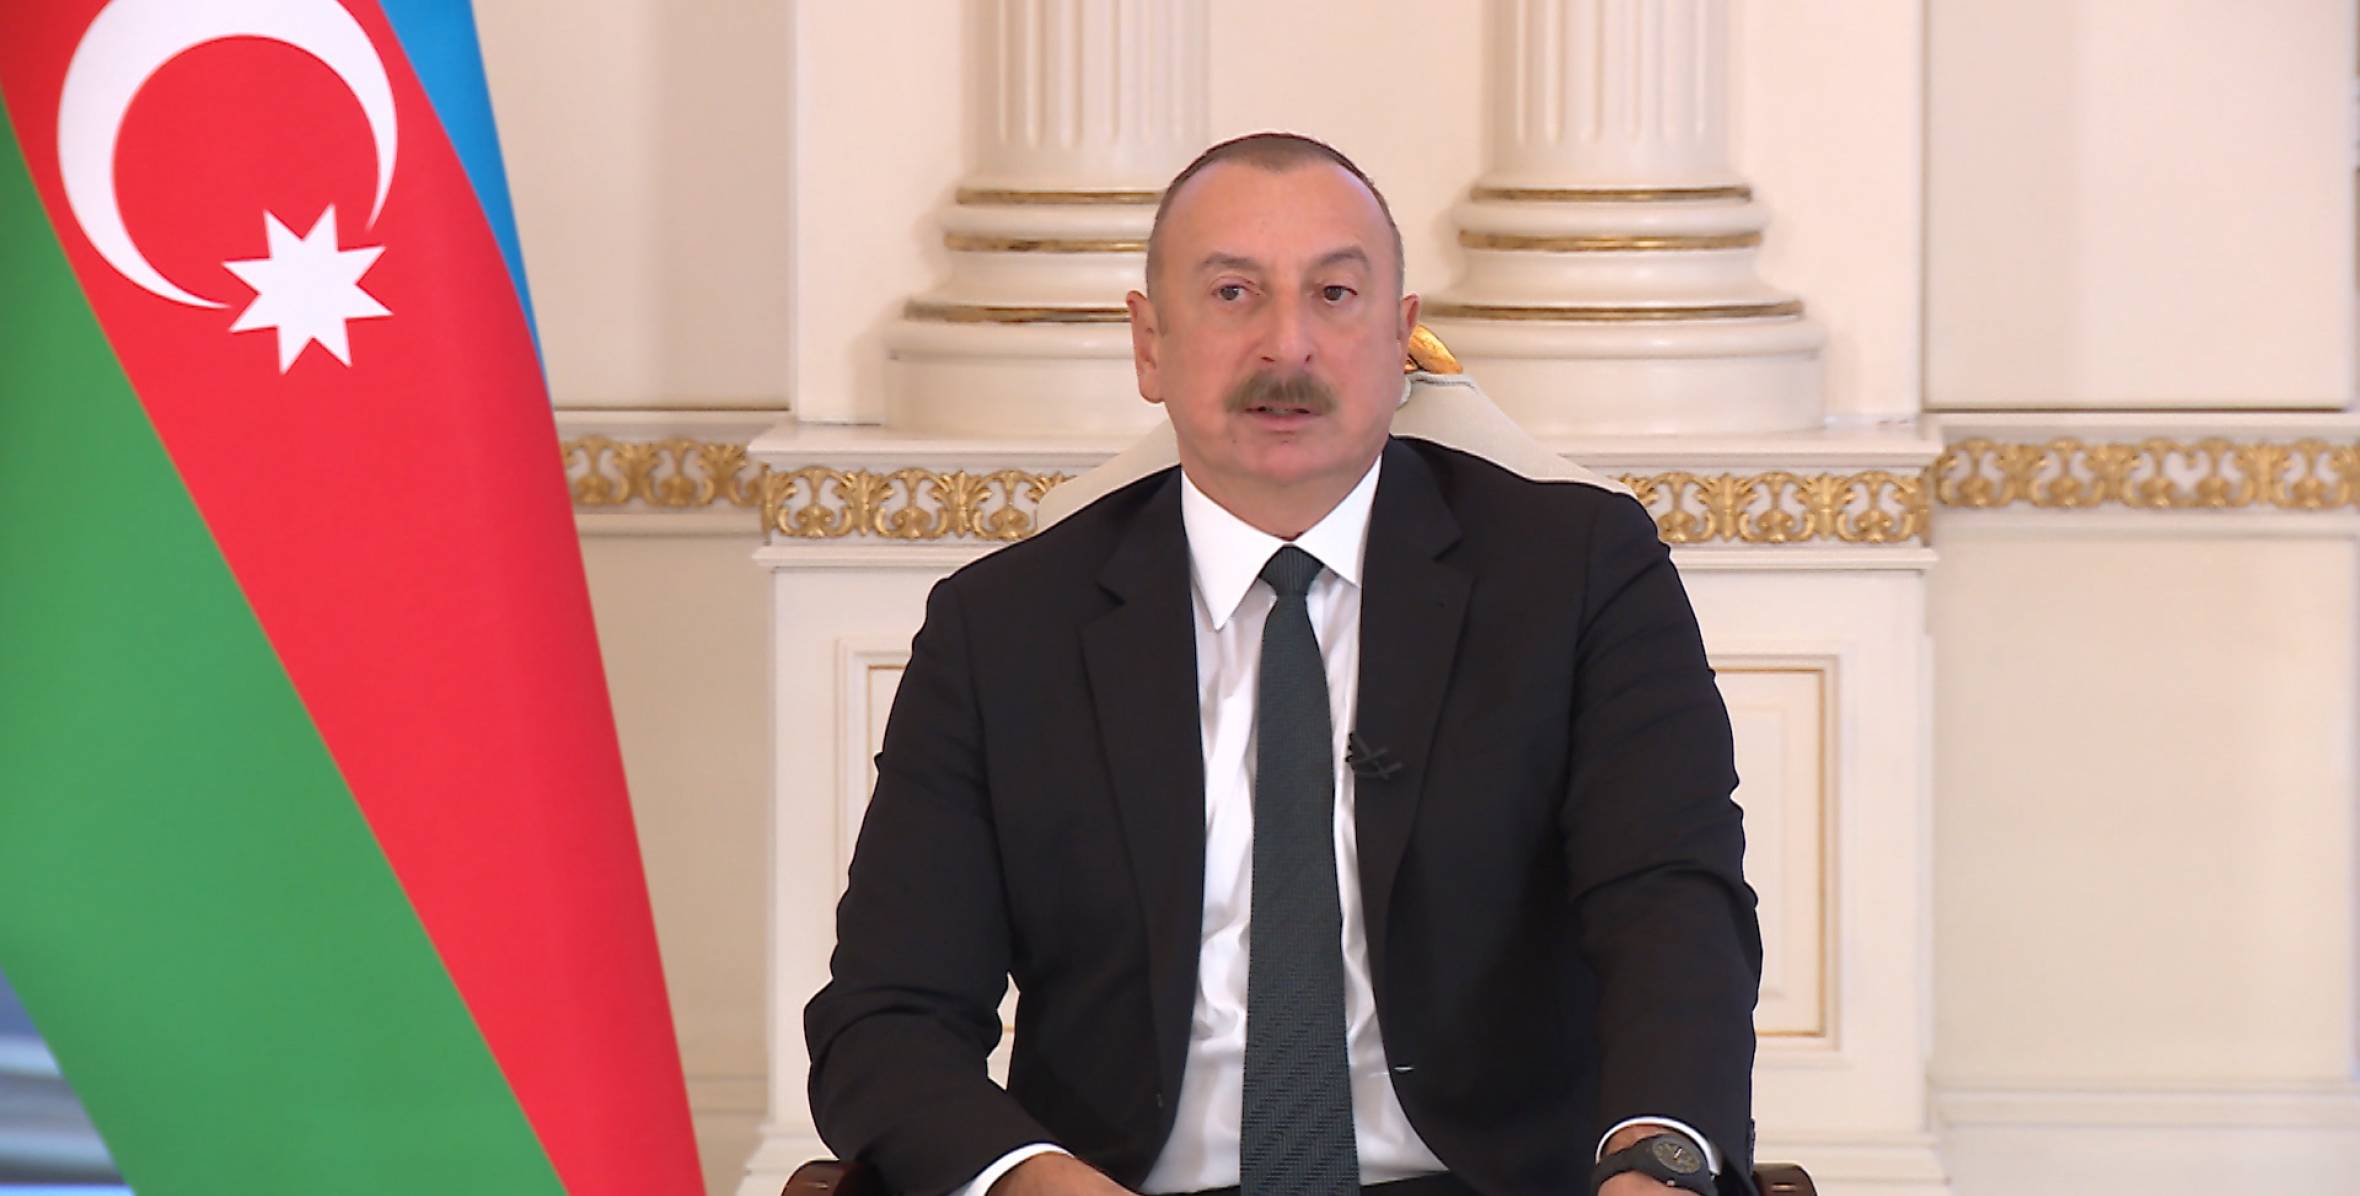 France is busy with geopolitical conspiracies in different regions - President Ilham Aliyev